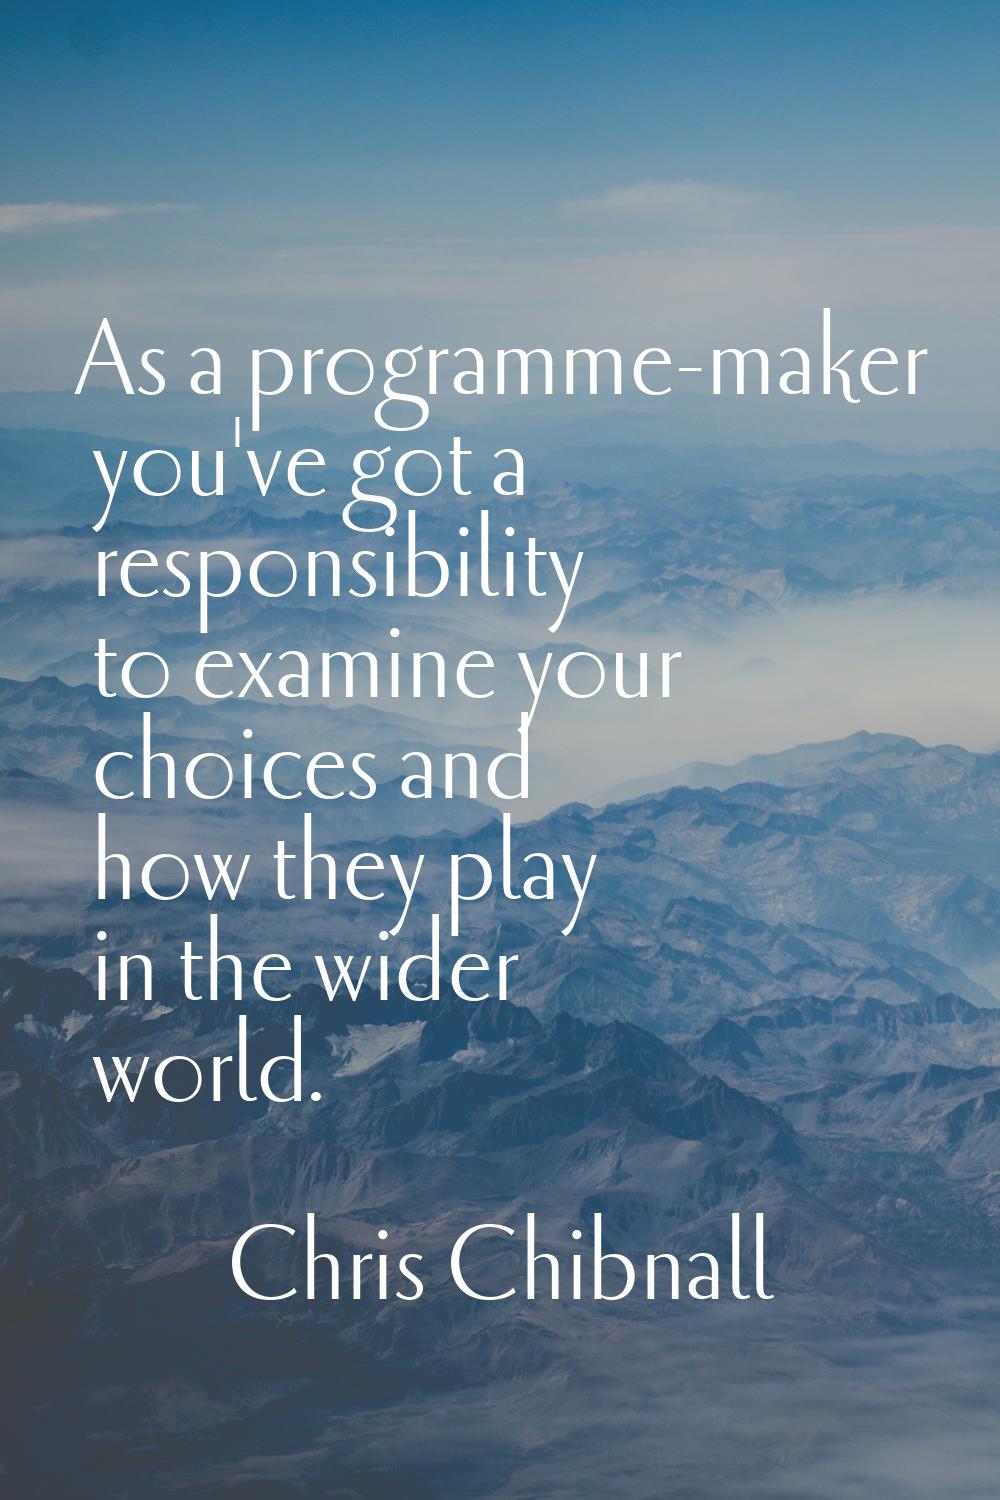 As a programme-maker you've got a responsibility to examine your choices and how they play in the w